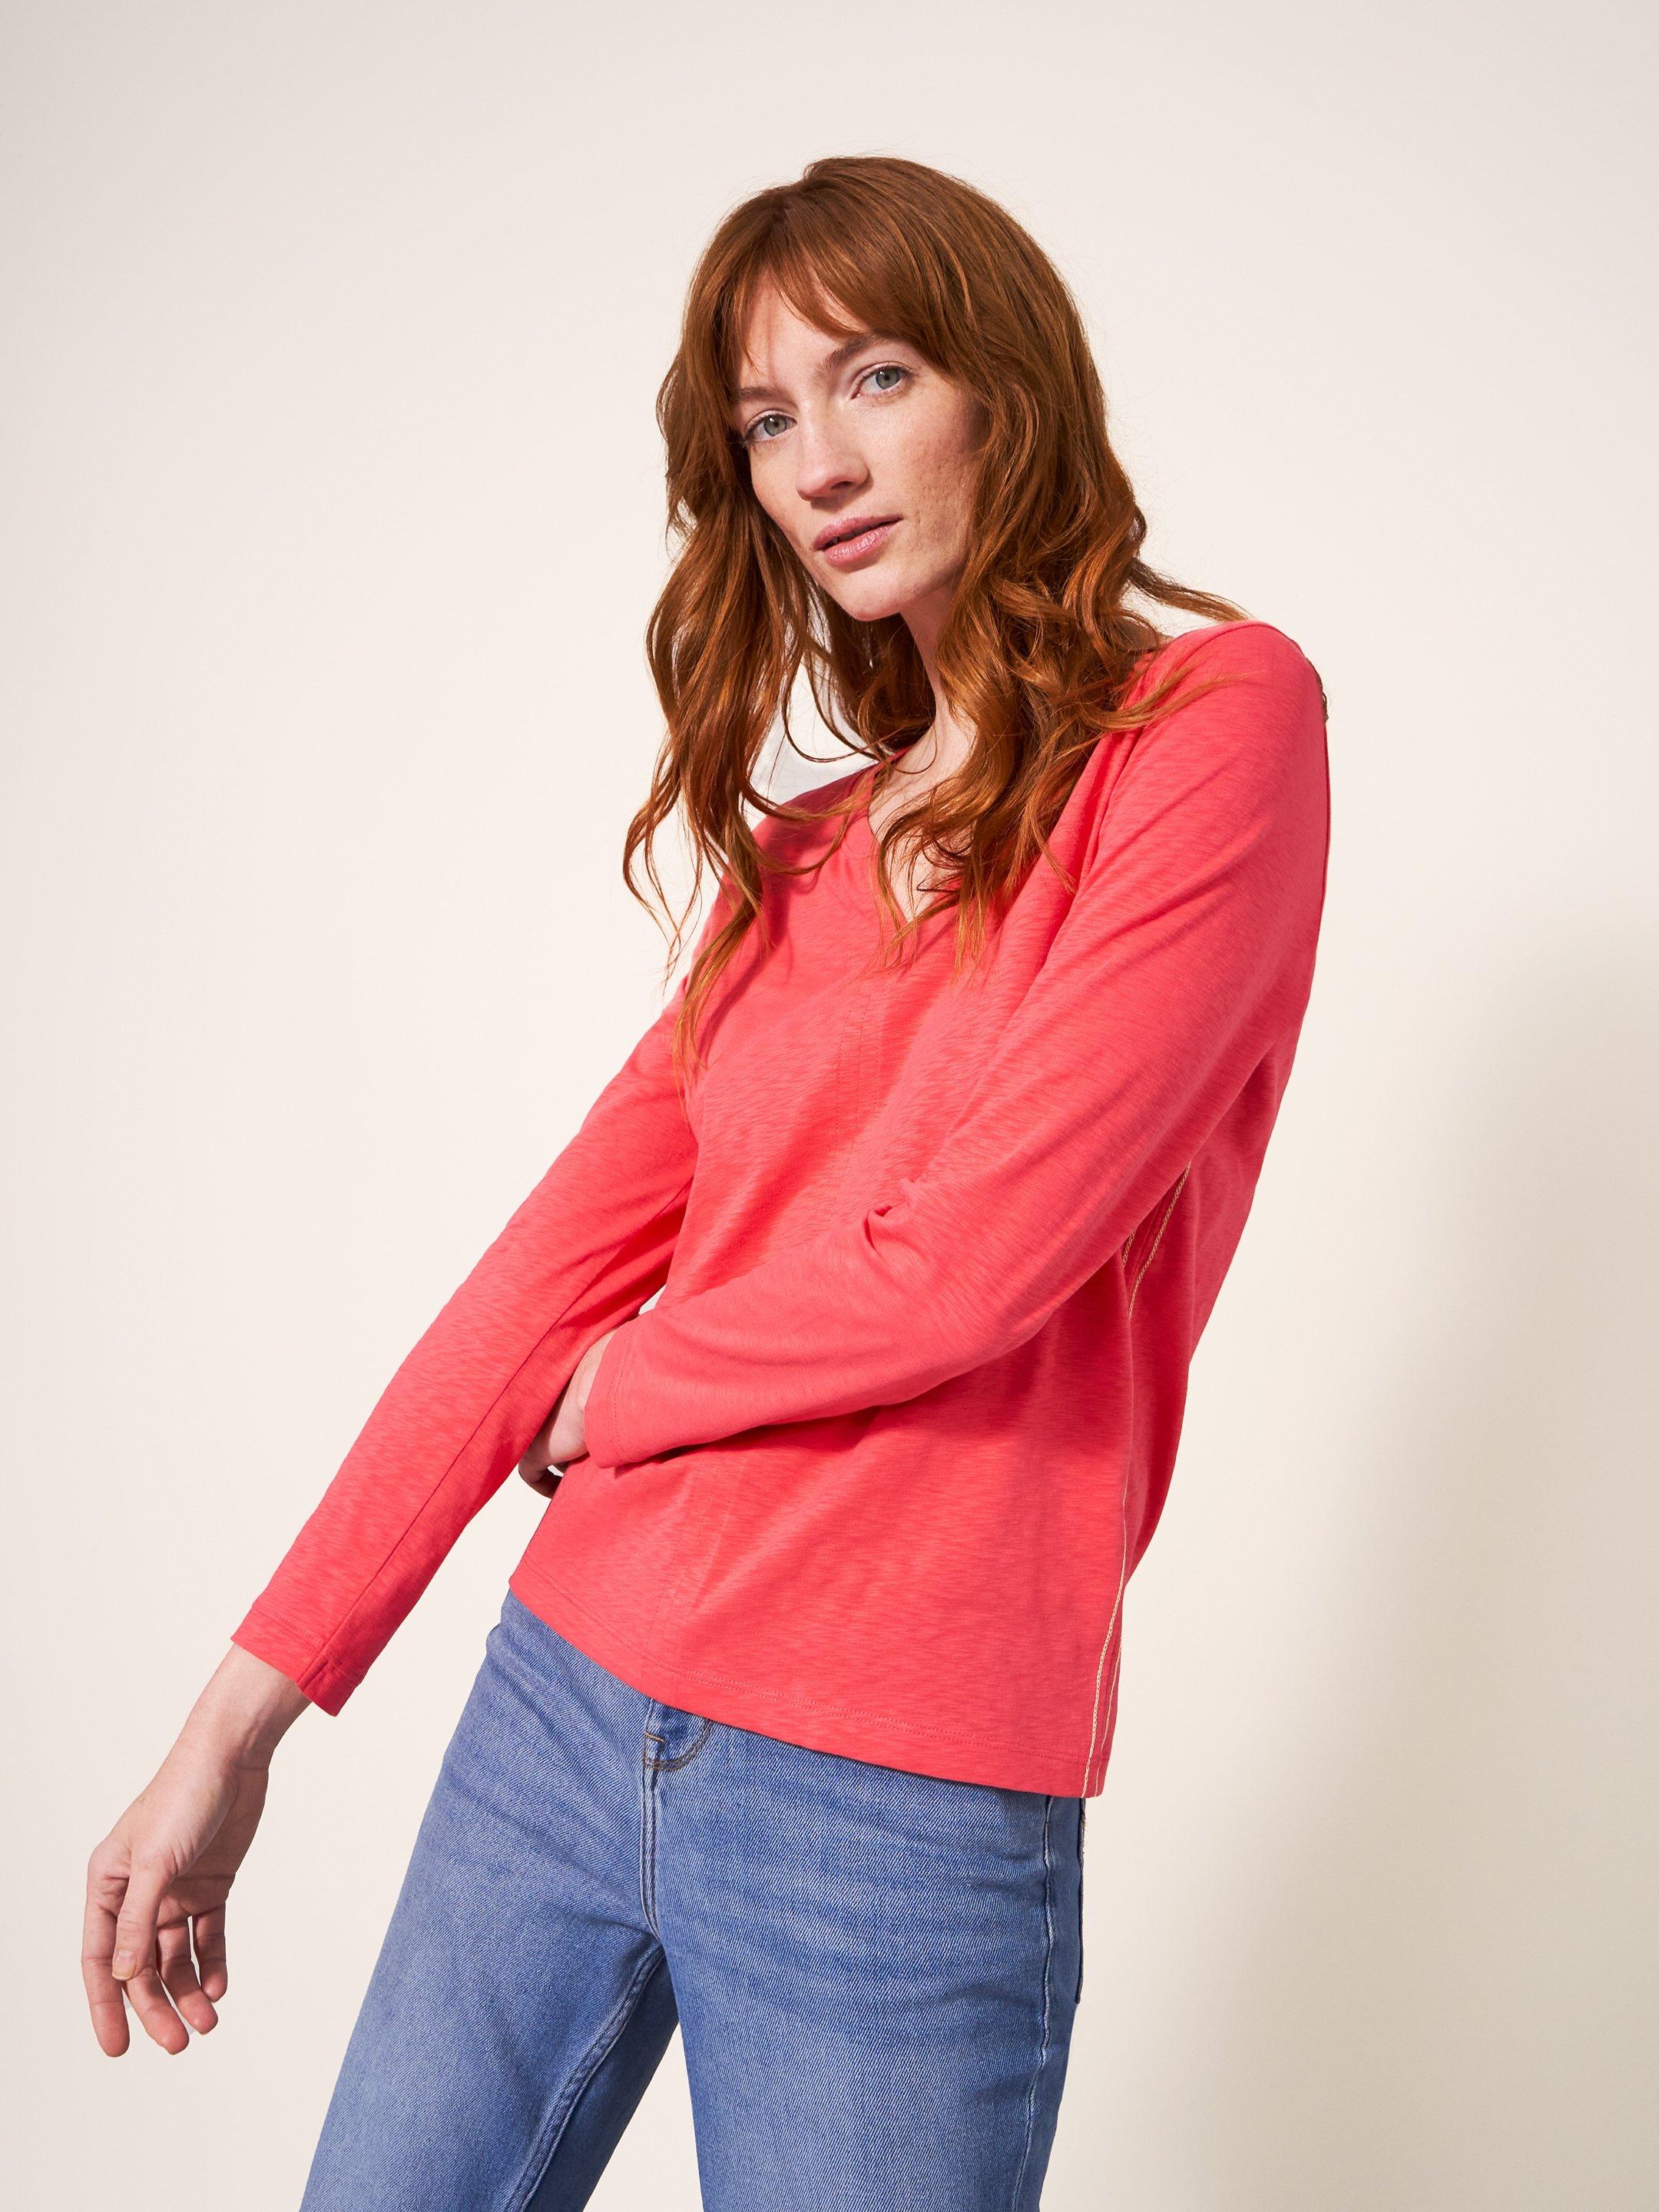 Nelly Long Sleeve T-Shirt in BRT PINK - undefined